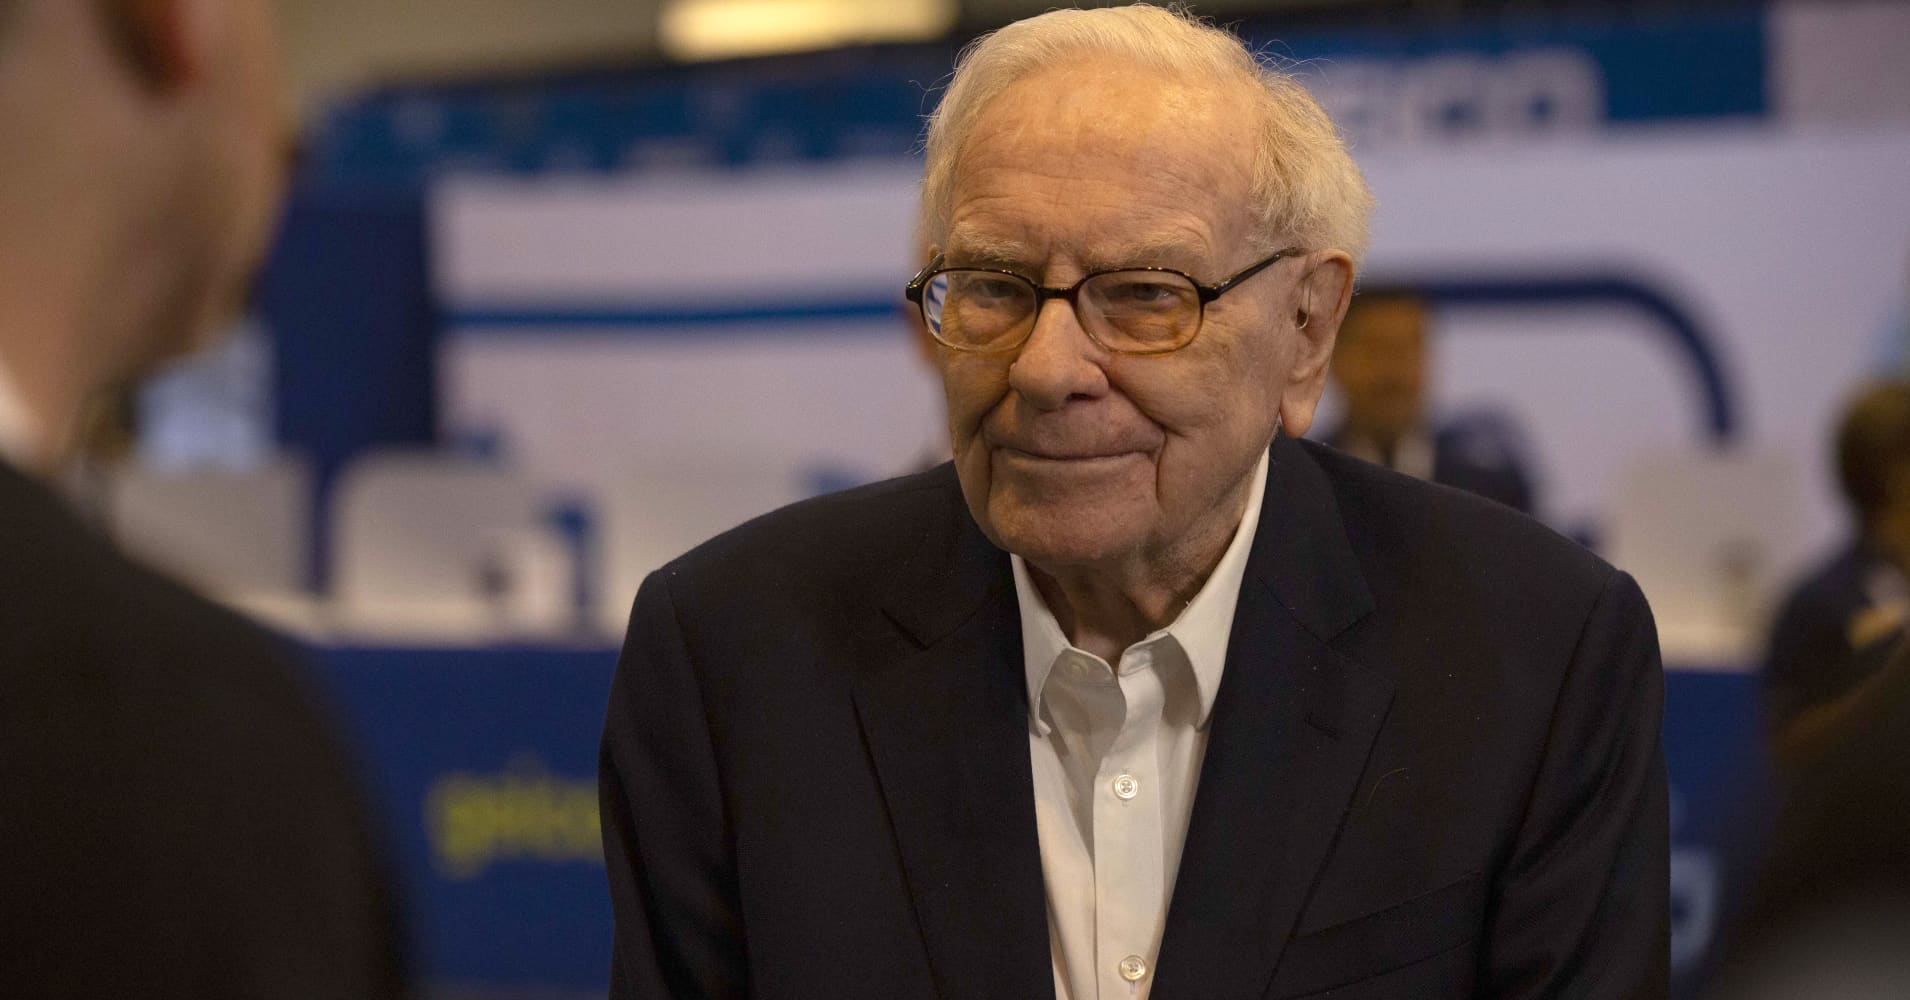 why warren buffett’s shareholders line up at 2 a.m. to see him in omaha: he’s 'the guy who changed our life'